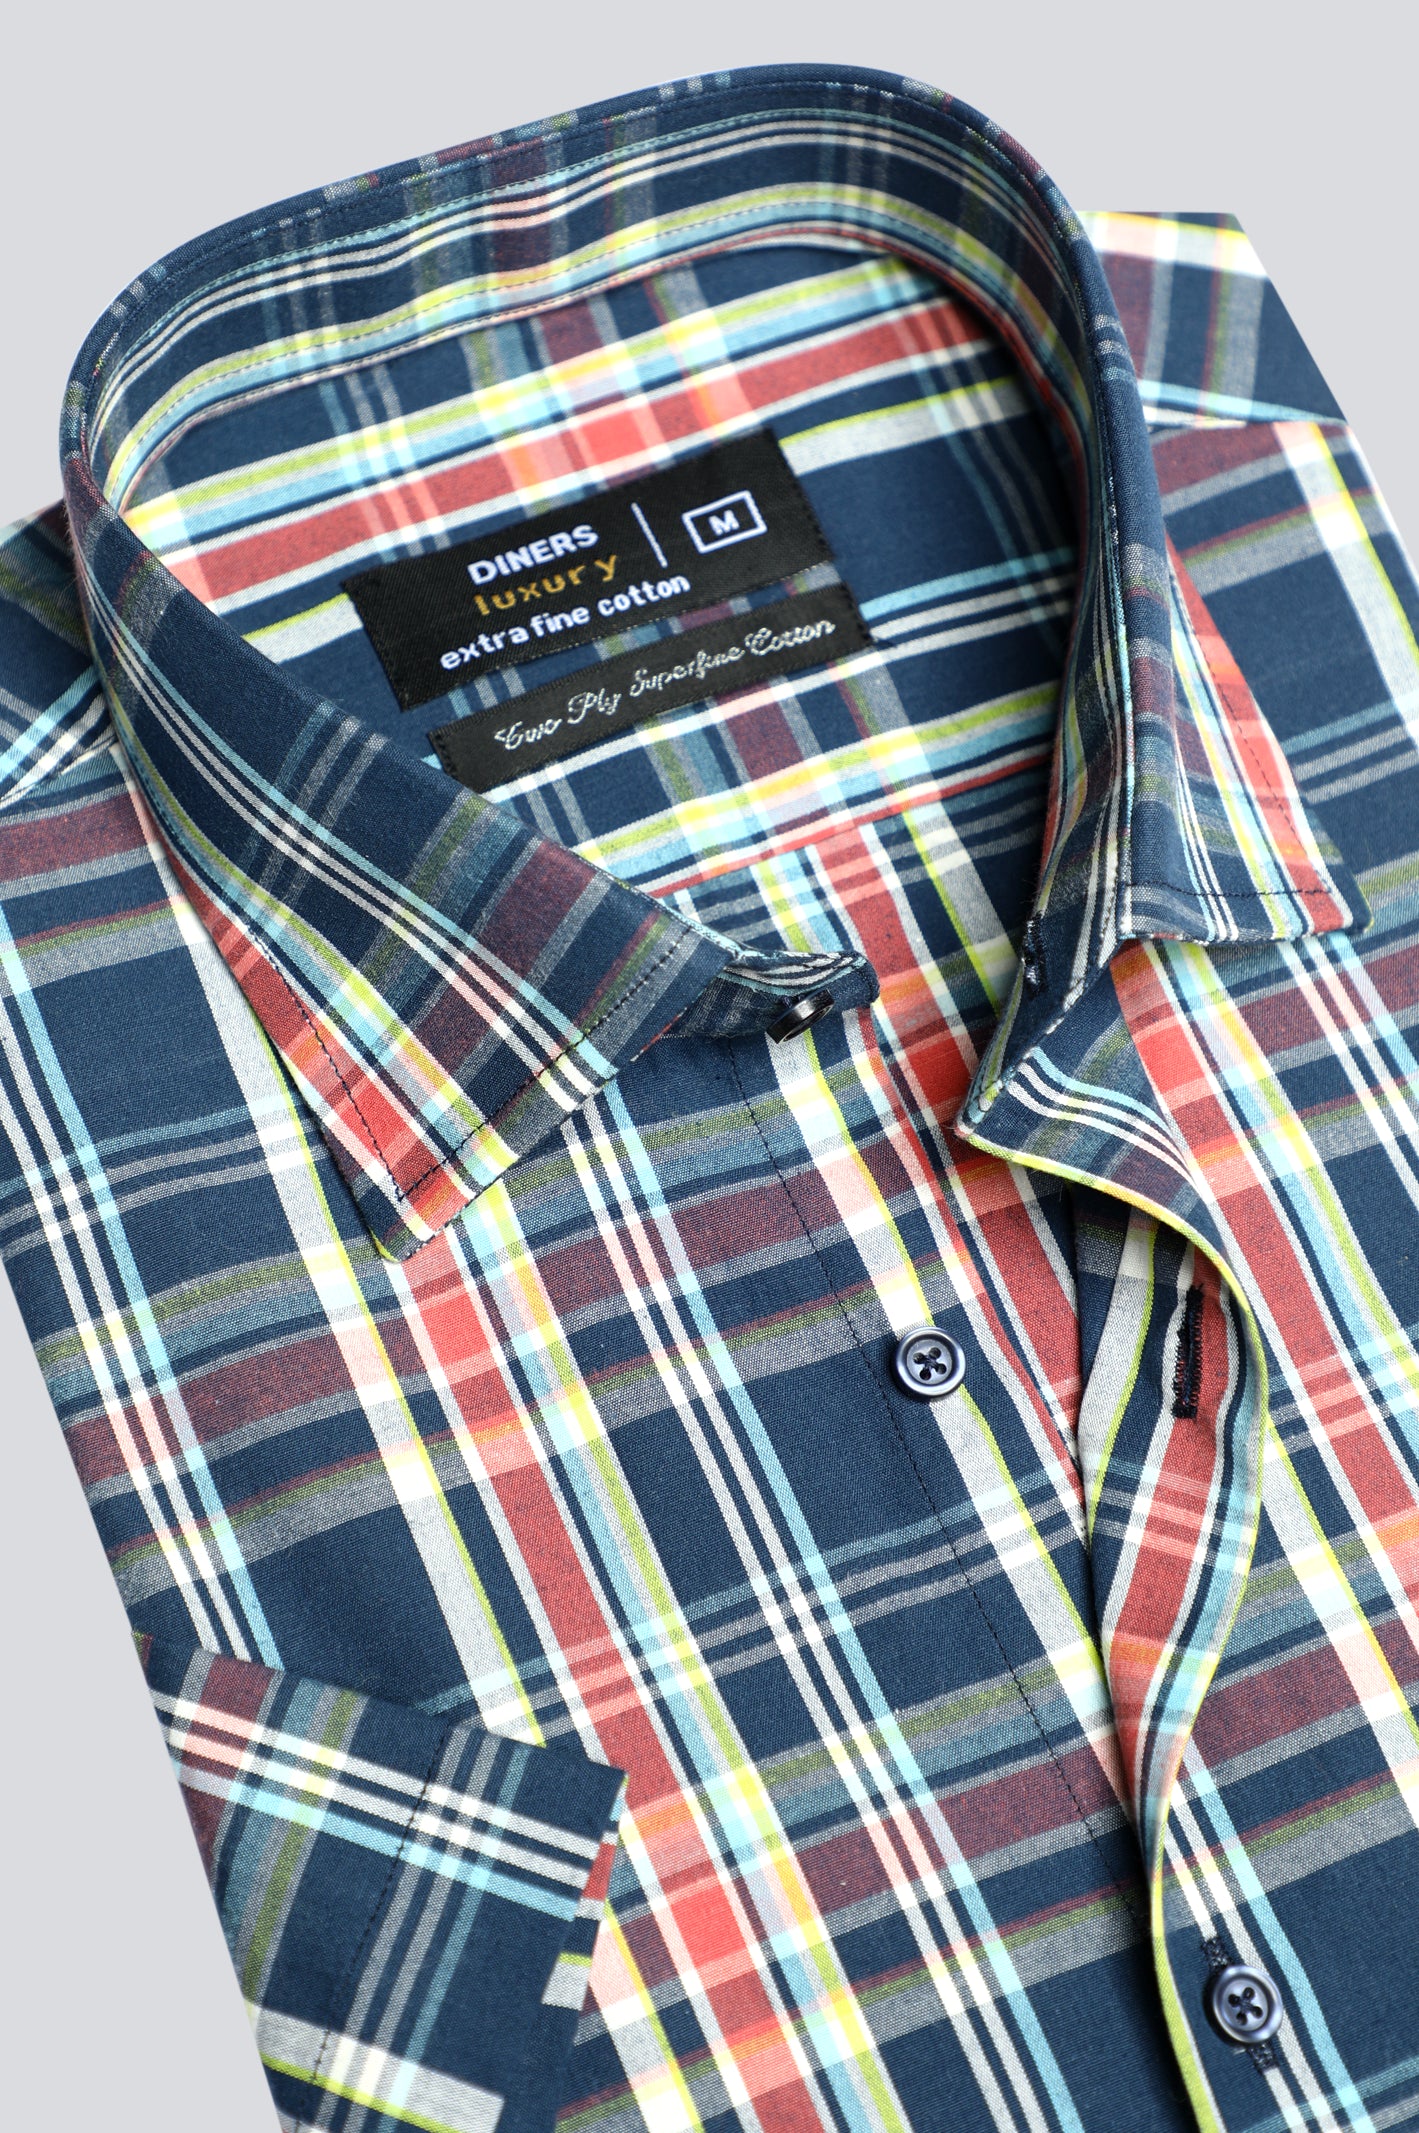 Glen Plaid Check Formal Shirt (Half Sleeve) From Diners